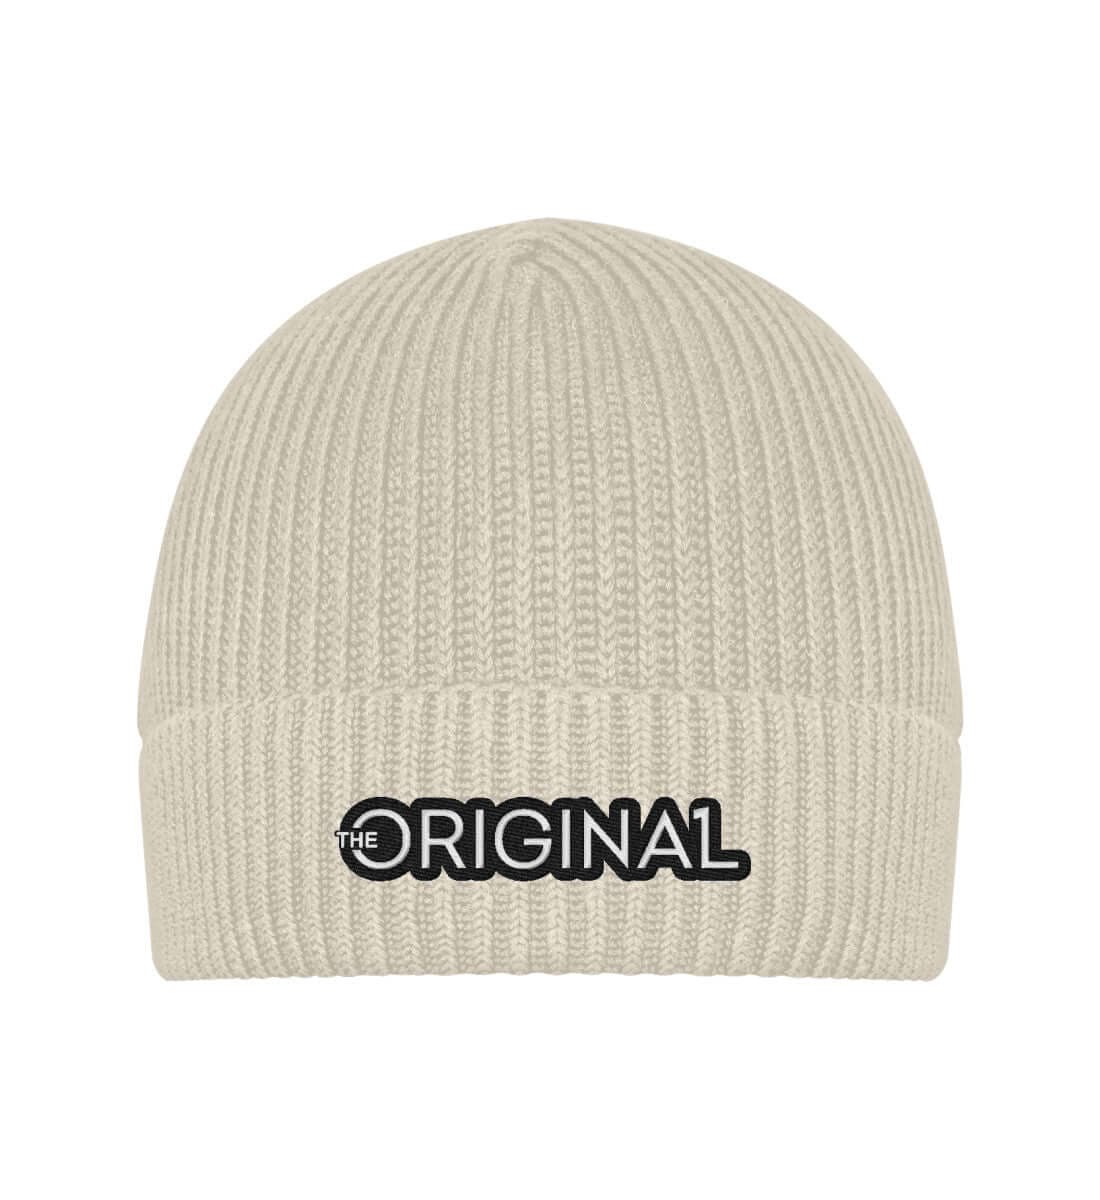 The Original One | Official Online Shop for Clothing and Accessories